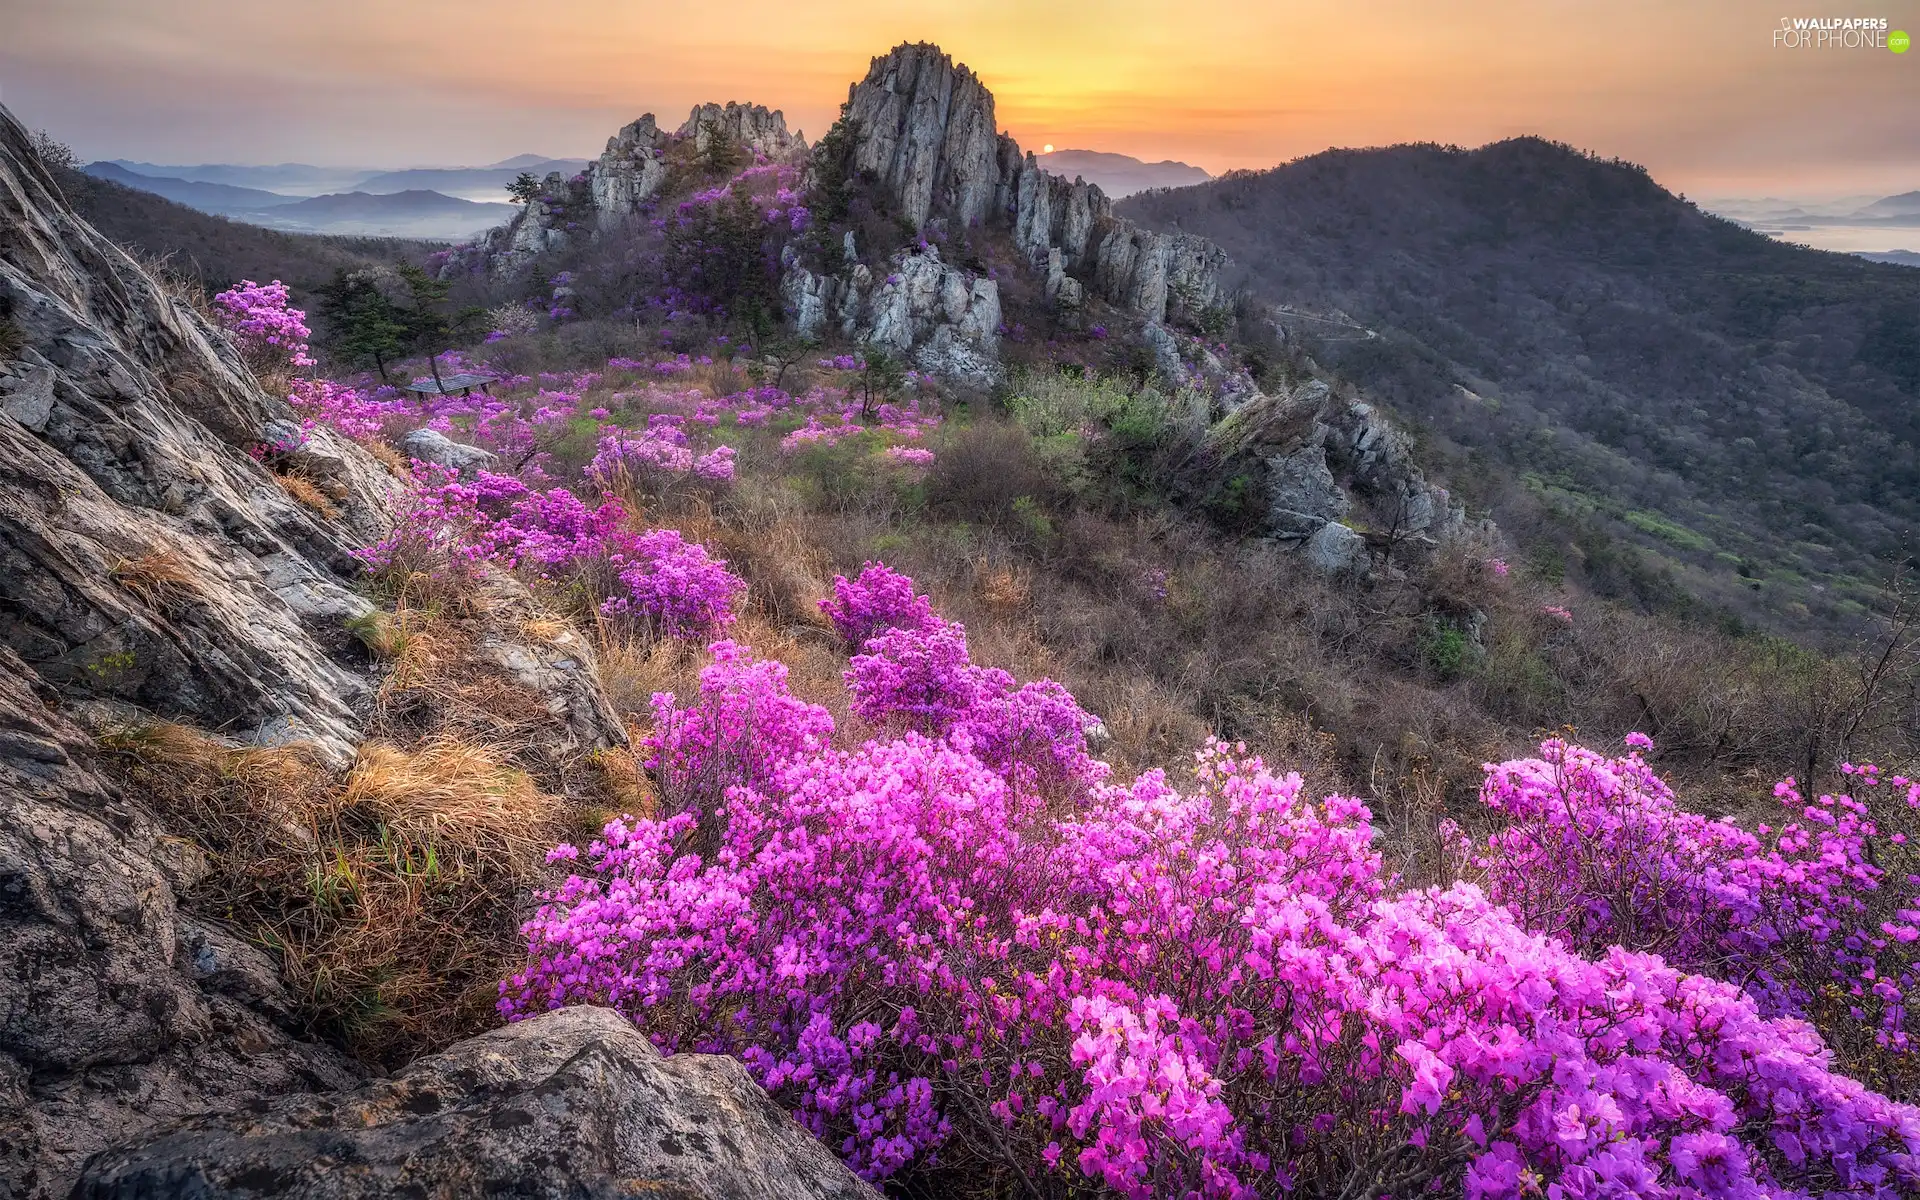 Flowers, rhododendron, Mountains, rocks, Sunrise